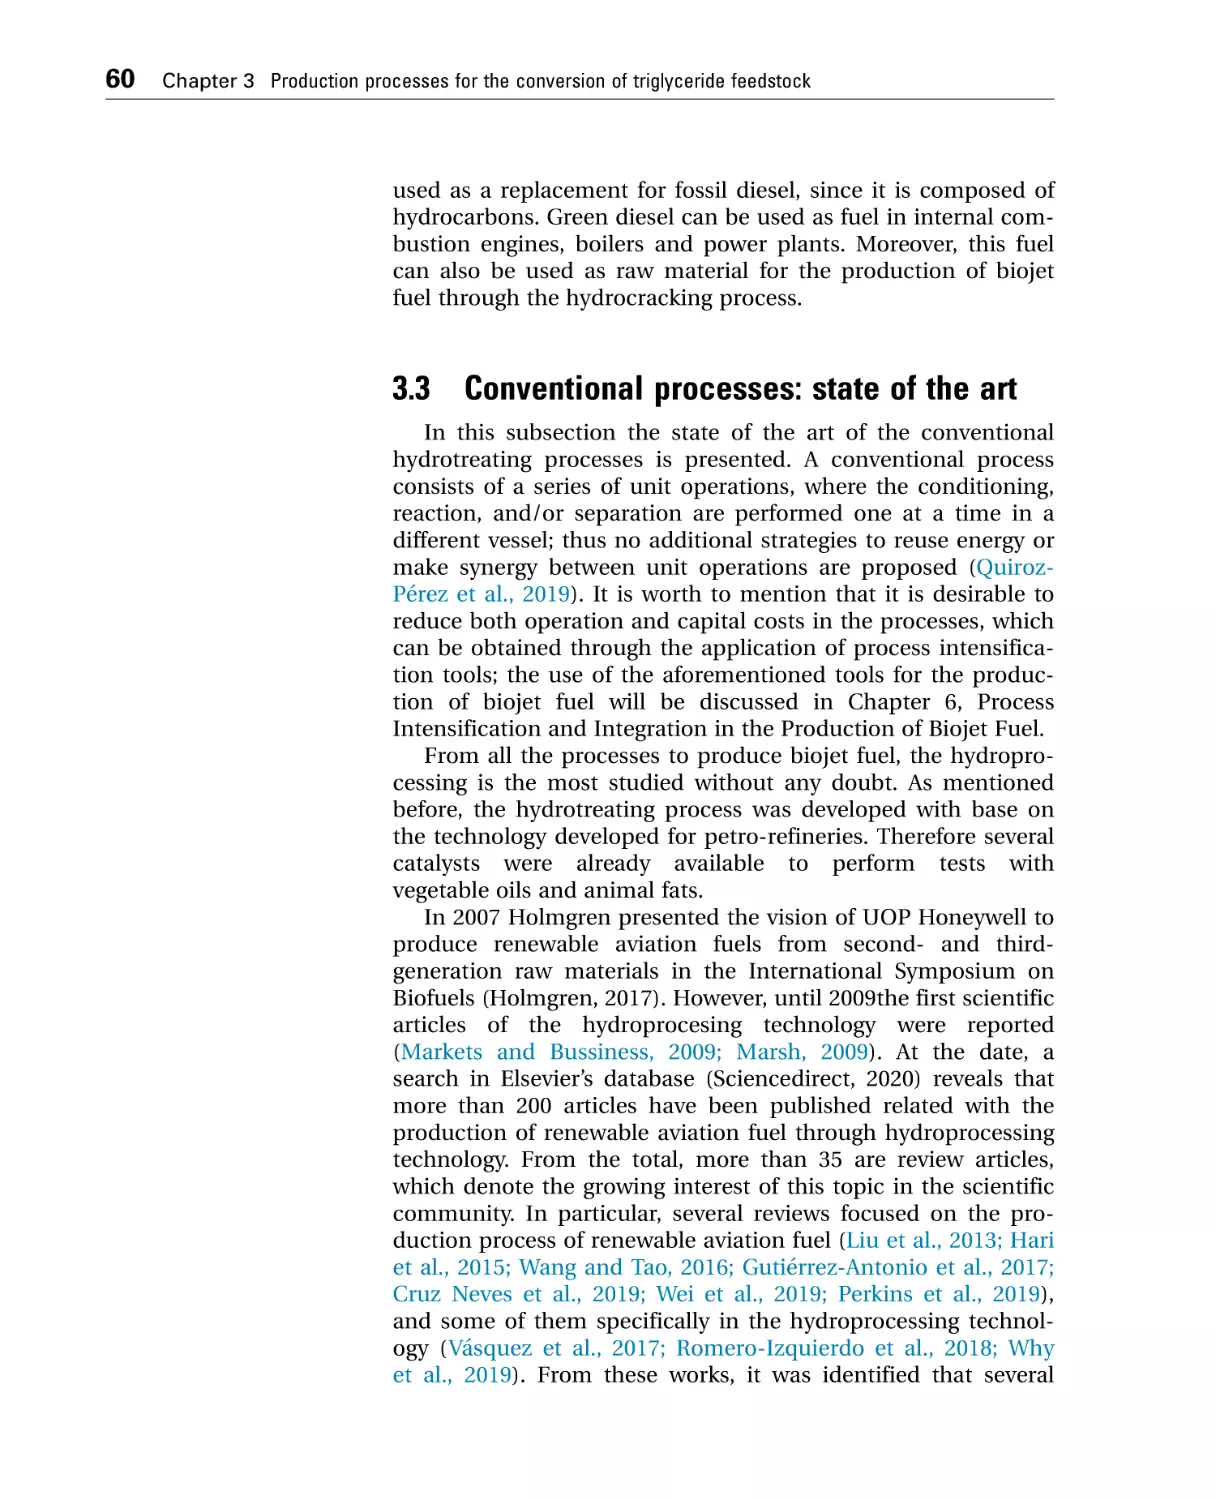 3.3 Conventional processes